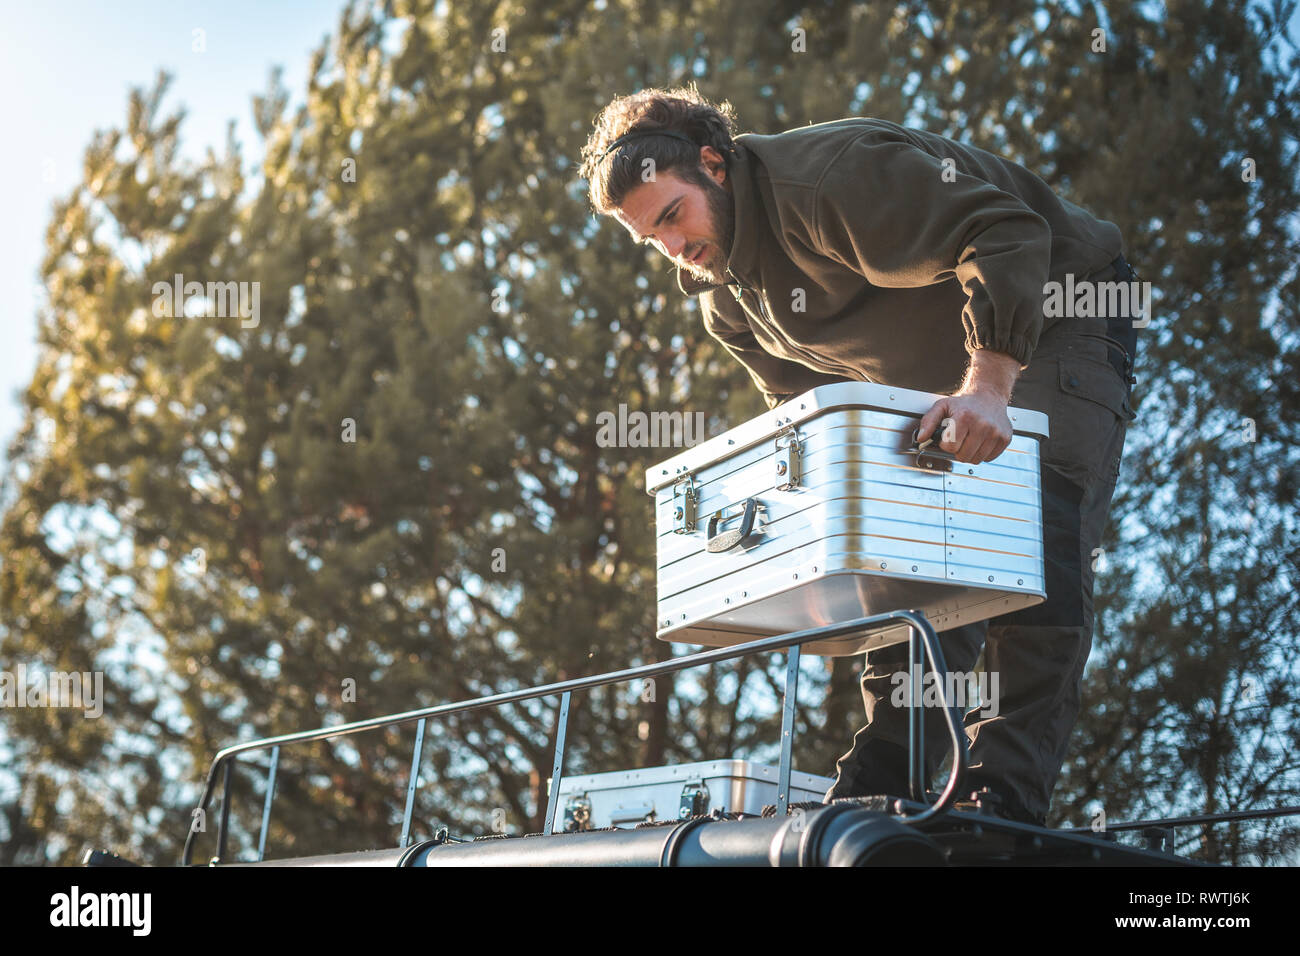 A man is handling a metal box on the roof of a camper van surrounded by nature Stock Photo